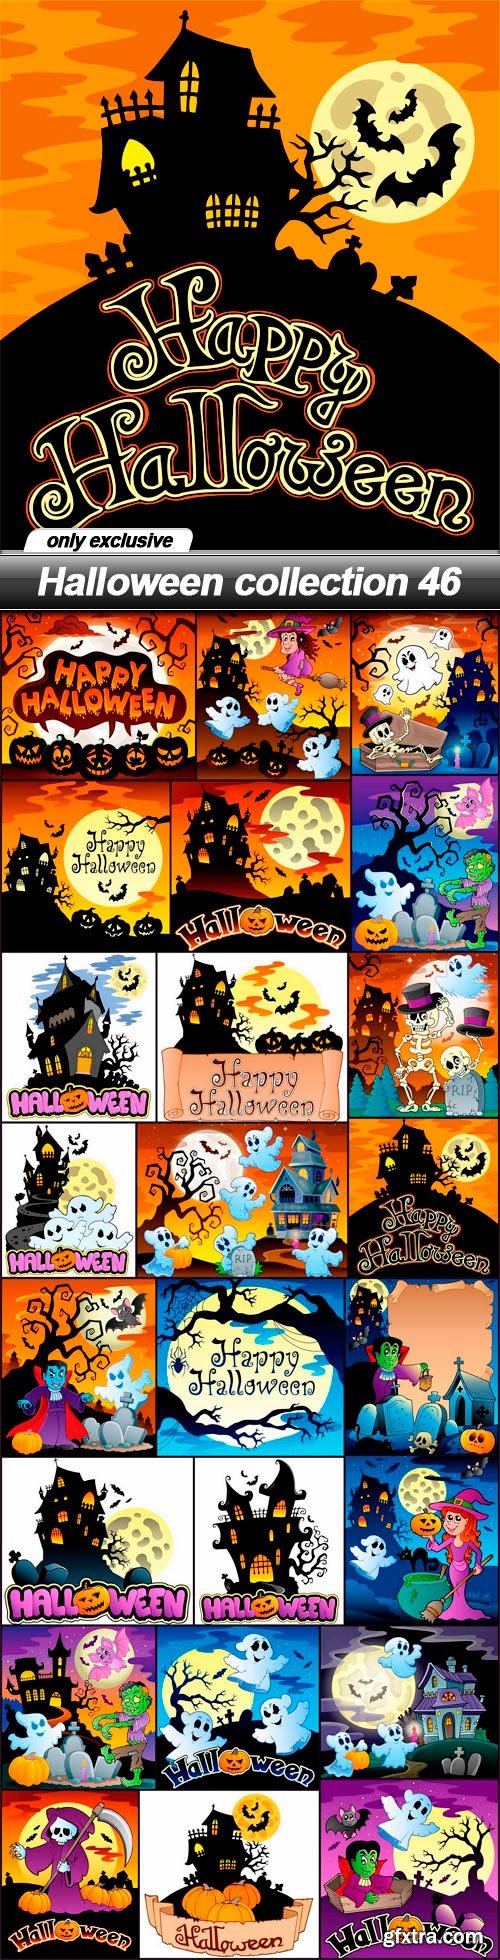 Halloween collection 46 - 24 EPS